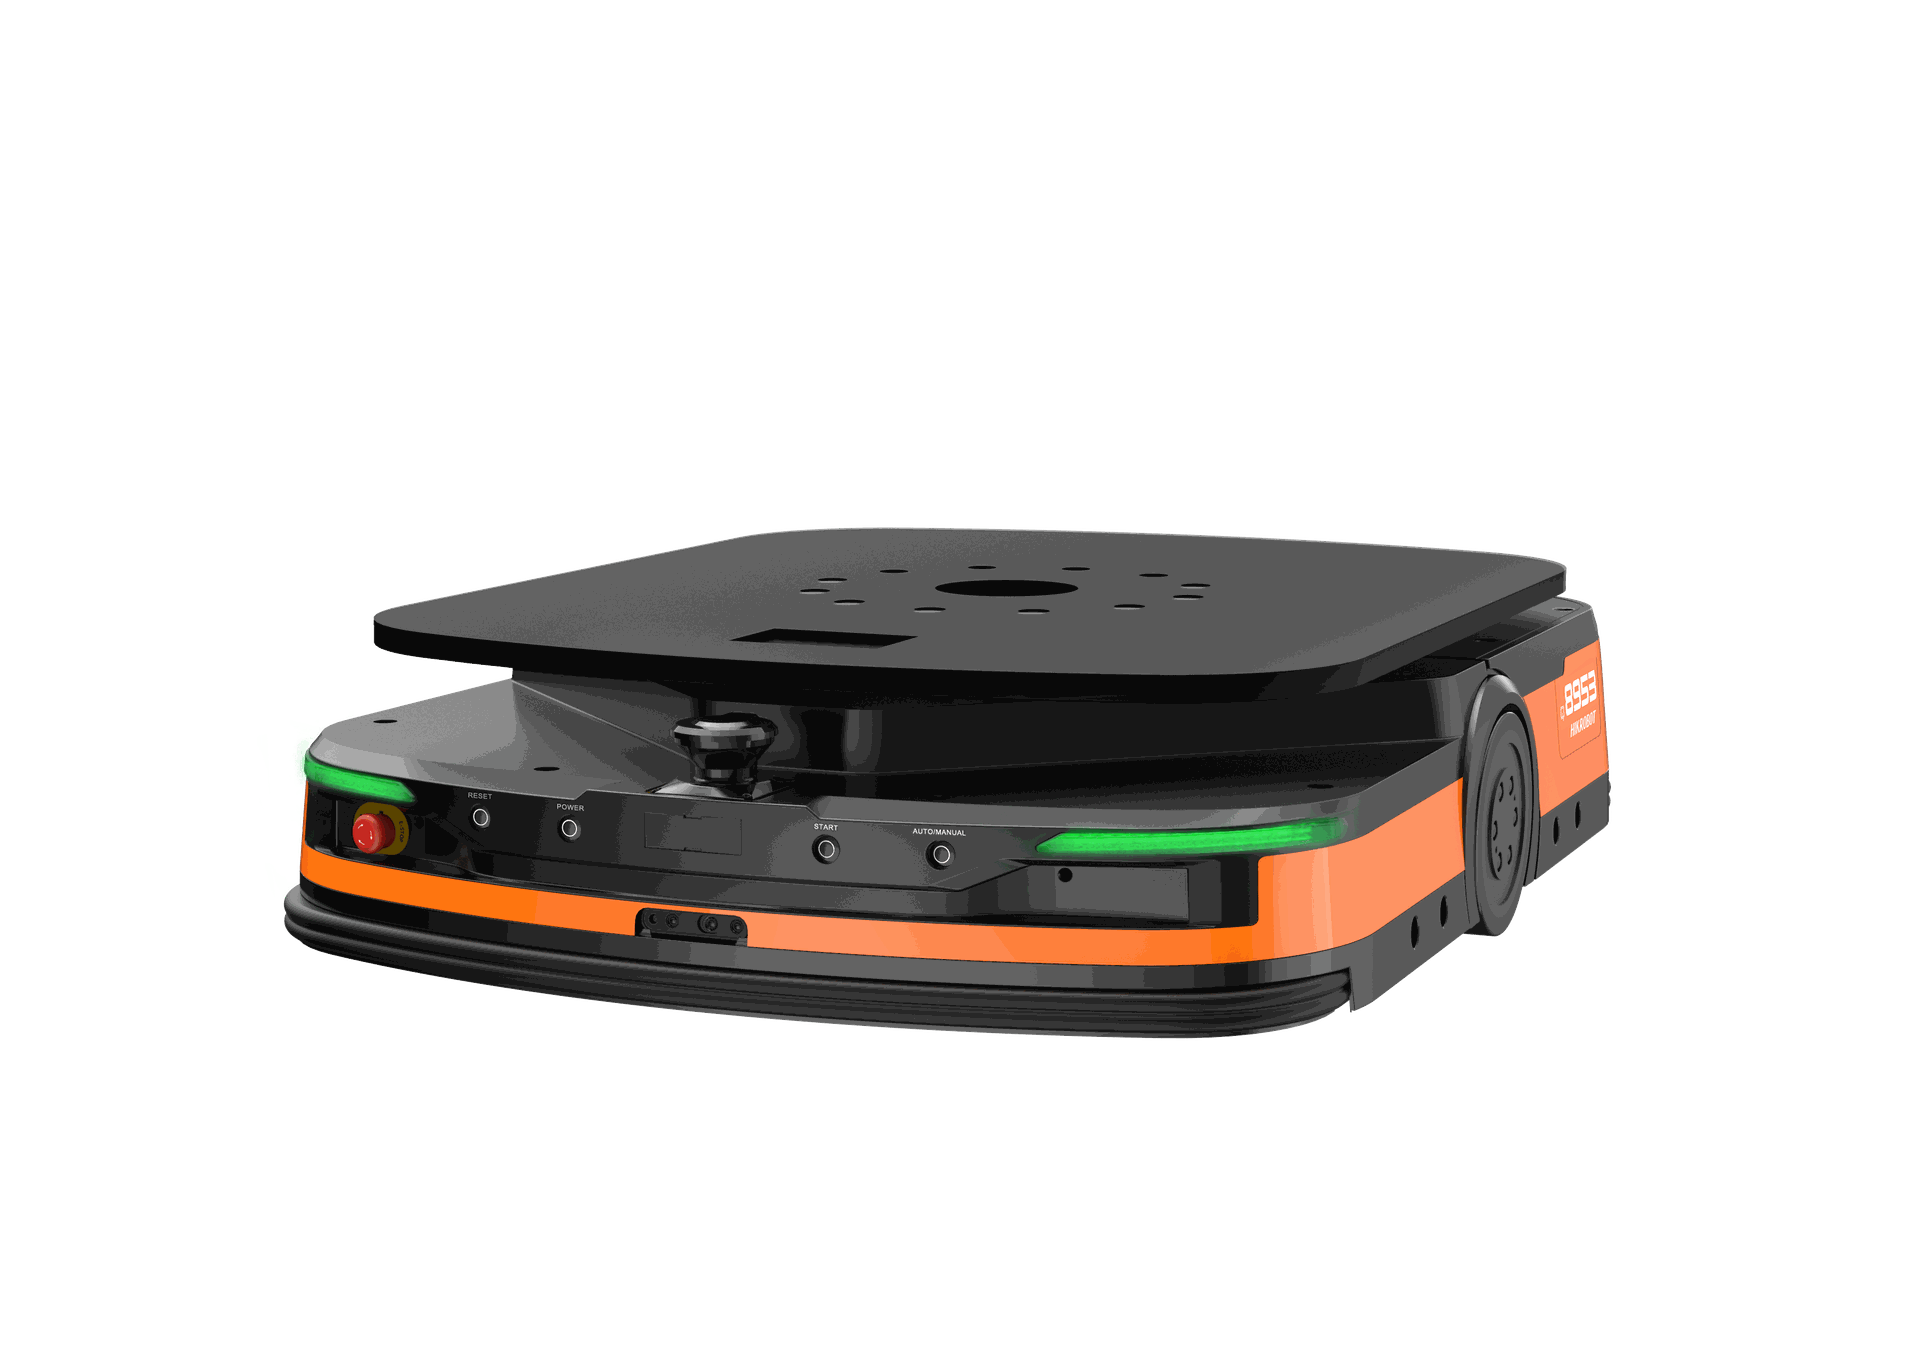 The Latent Mobile Robot from Hikrobot solves complex logistic  problems by automating the process.  Move, sort and log your inventory with autonomous ground vehicles. (AGV)